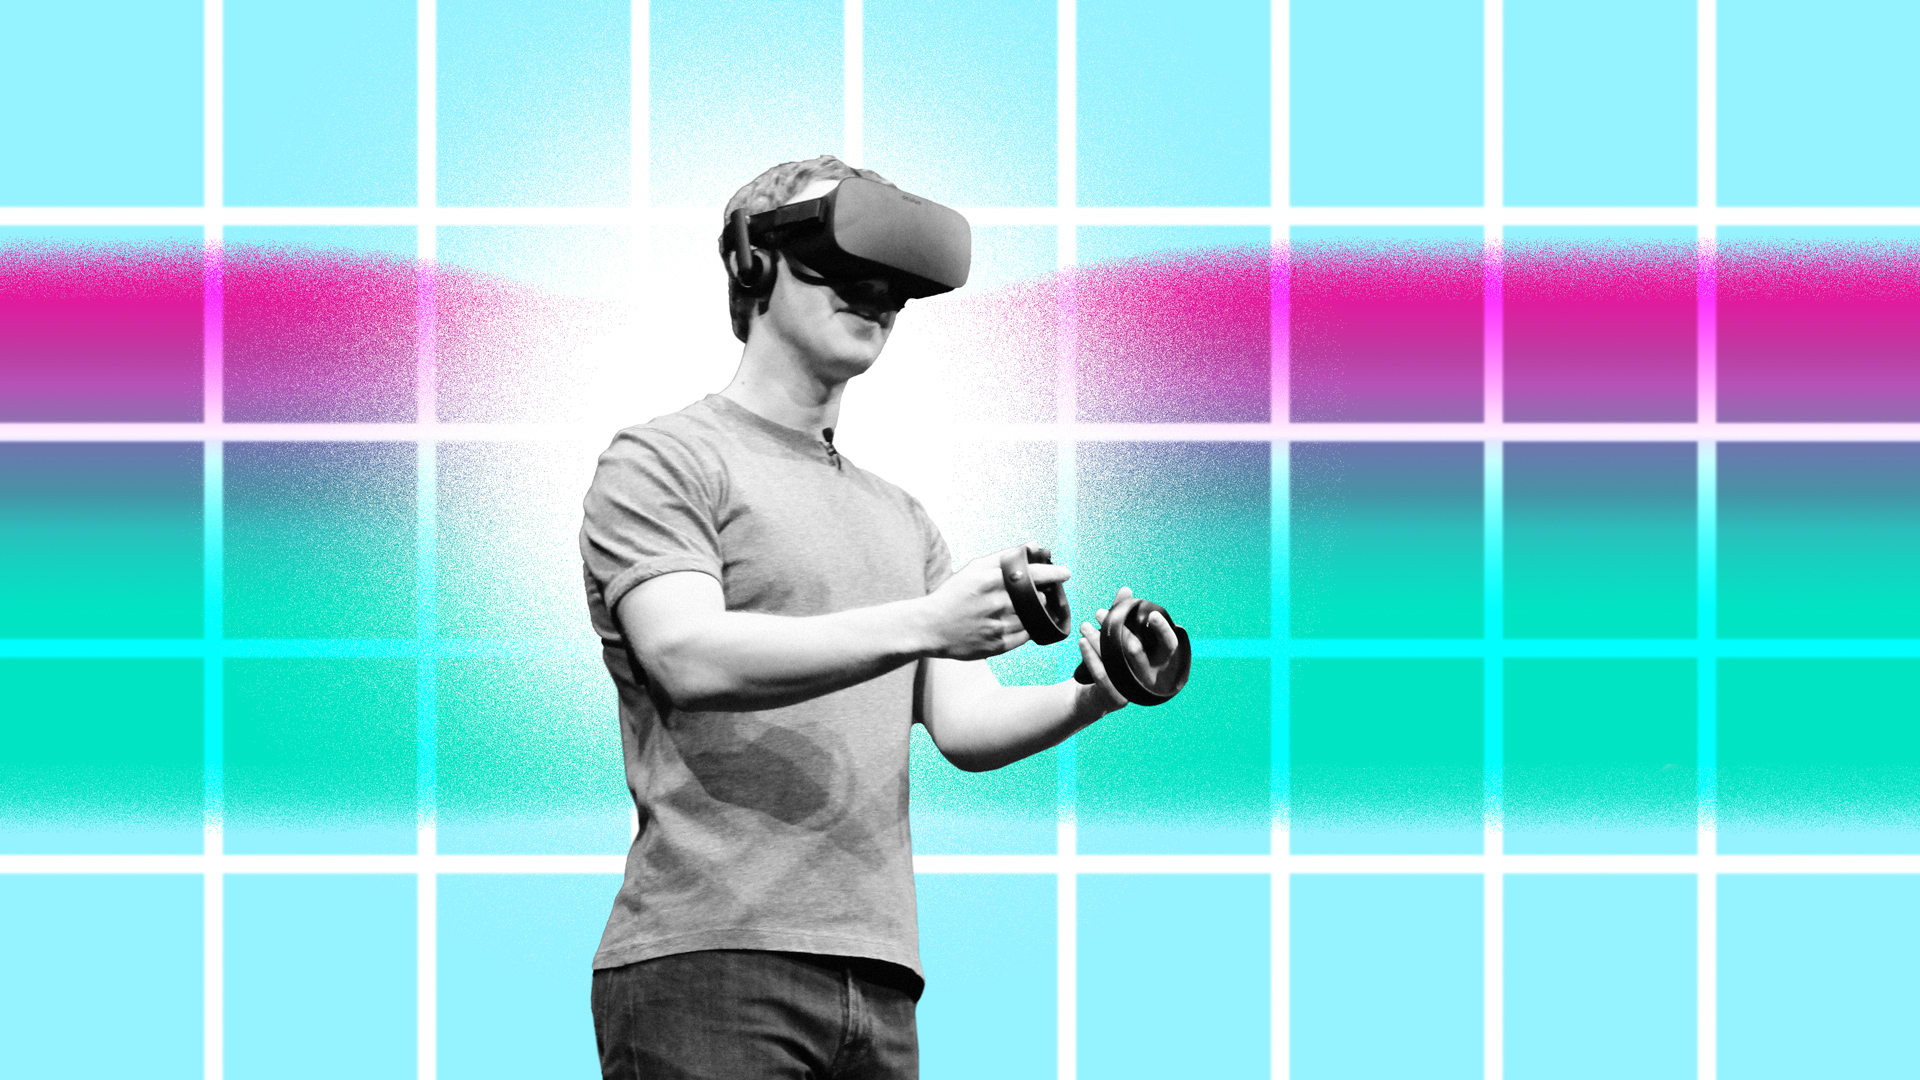 Why Facebook’s premature talk about a metaverse will likely backfire